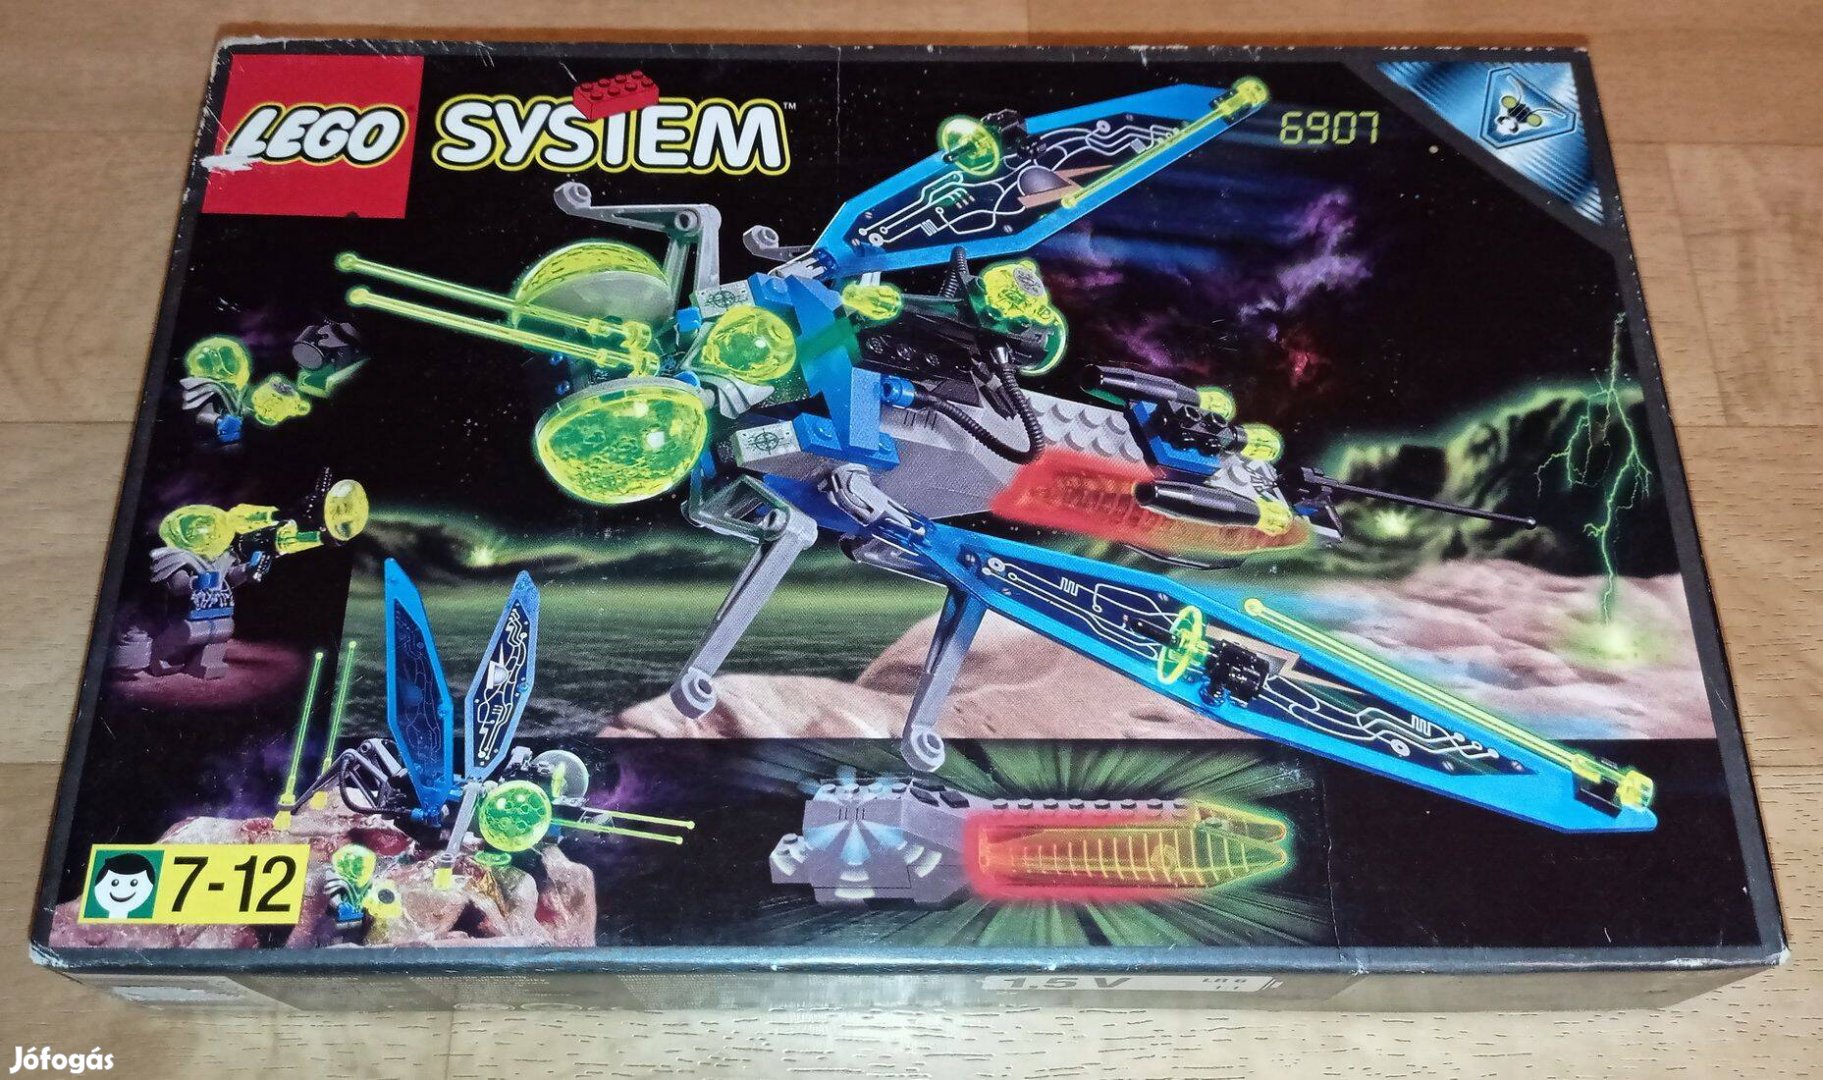 LEGO System Space, Insectoids: 6907 - Sonic Stinger